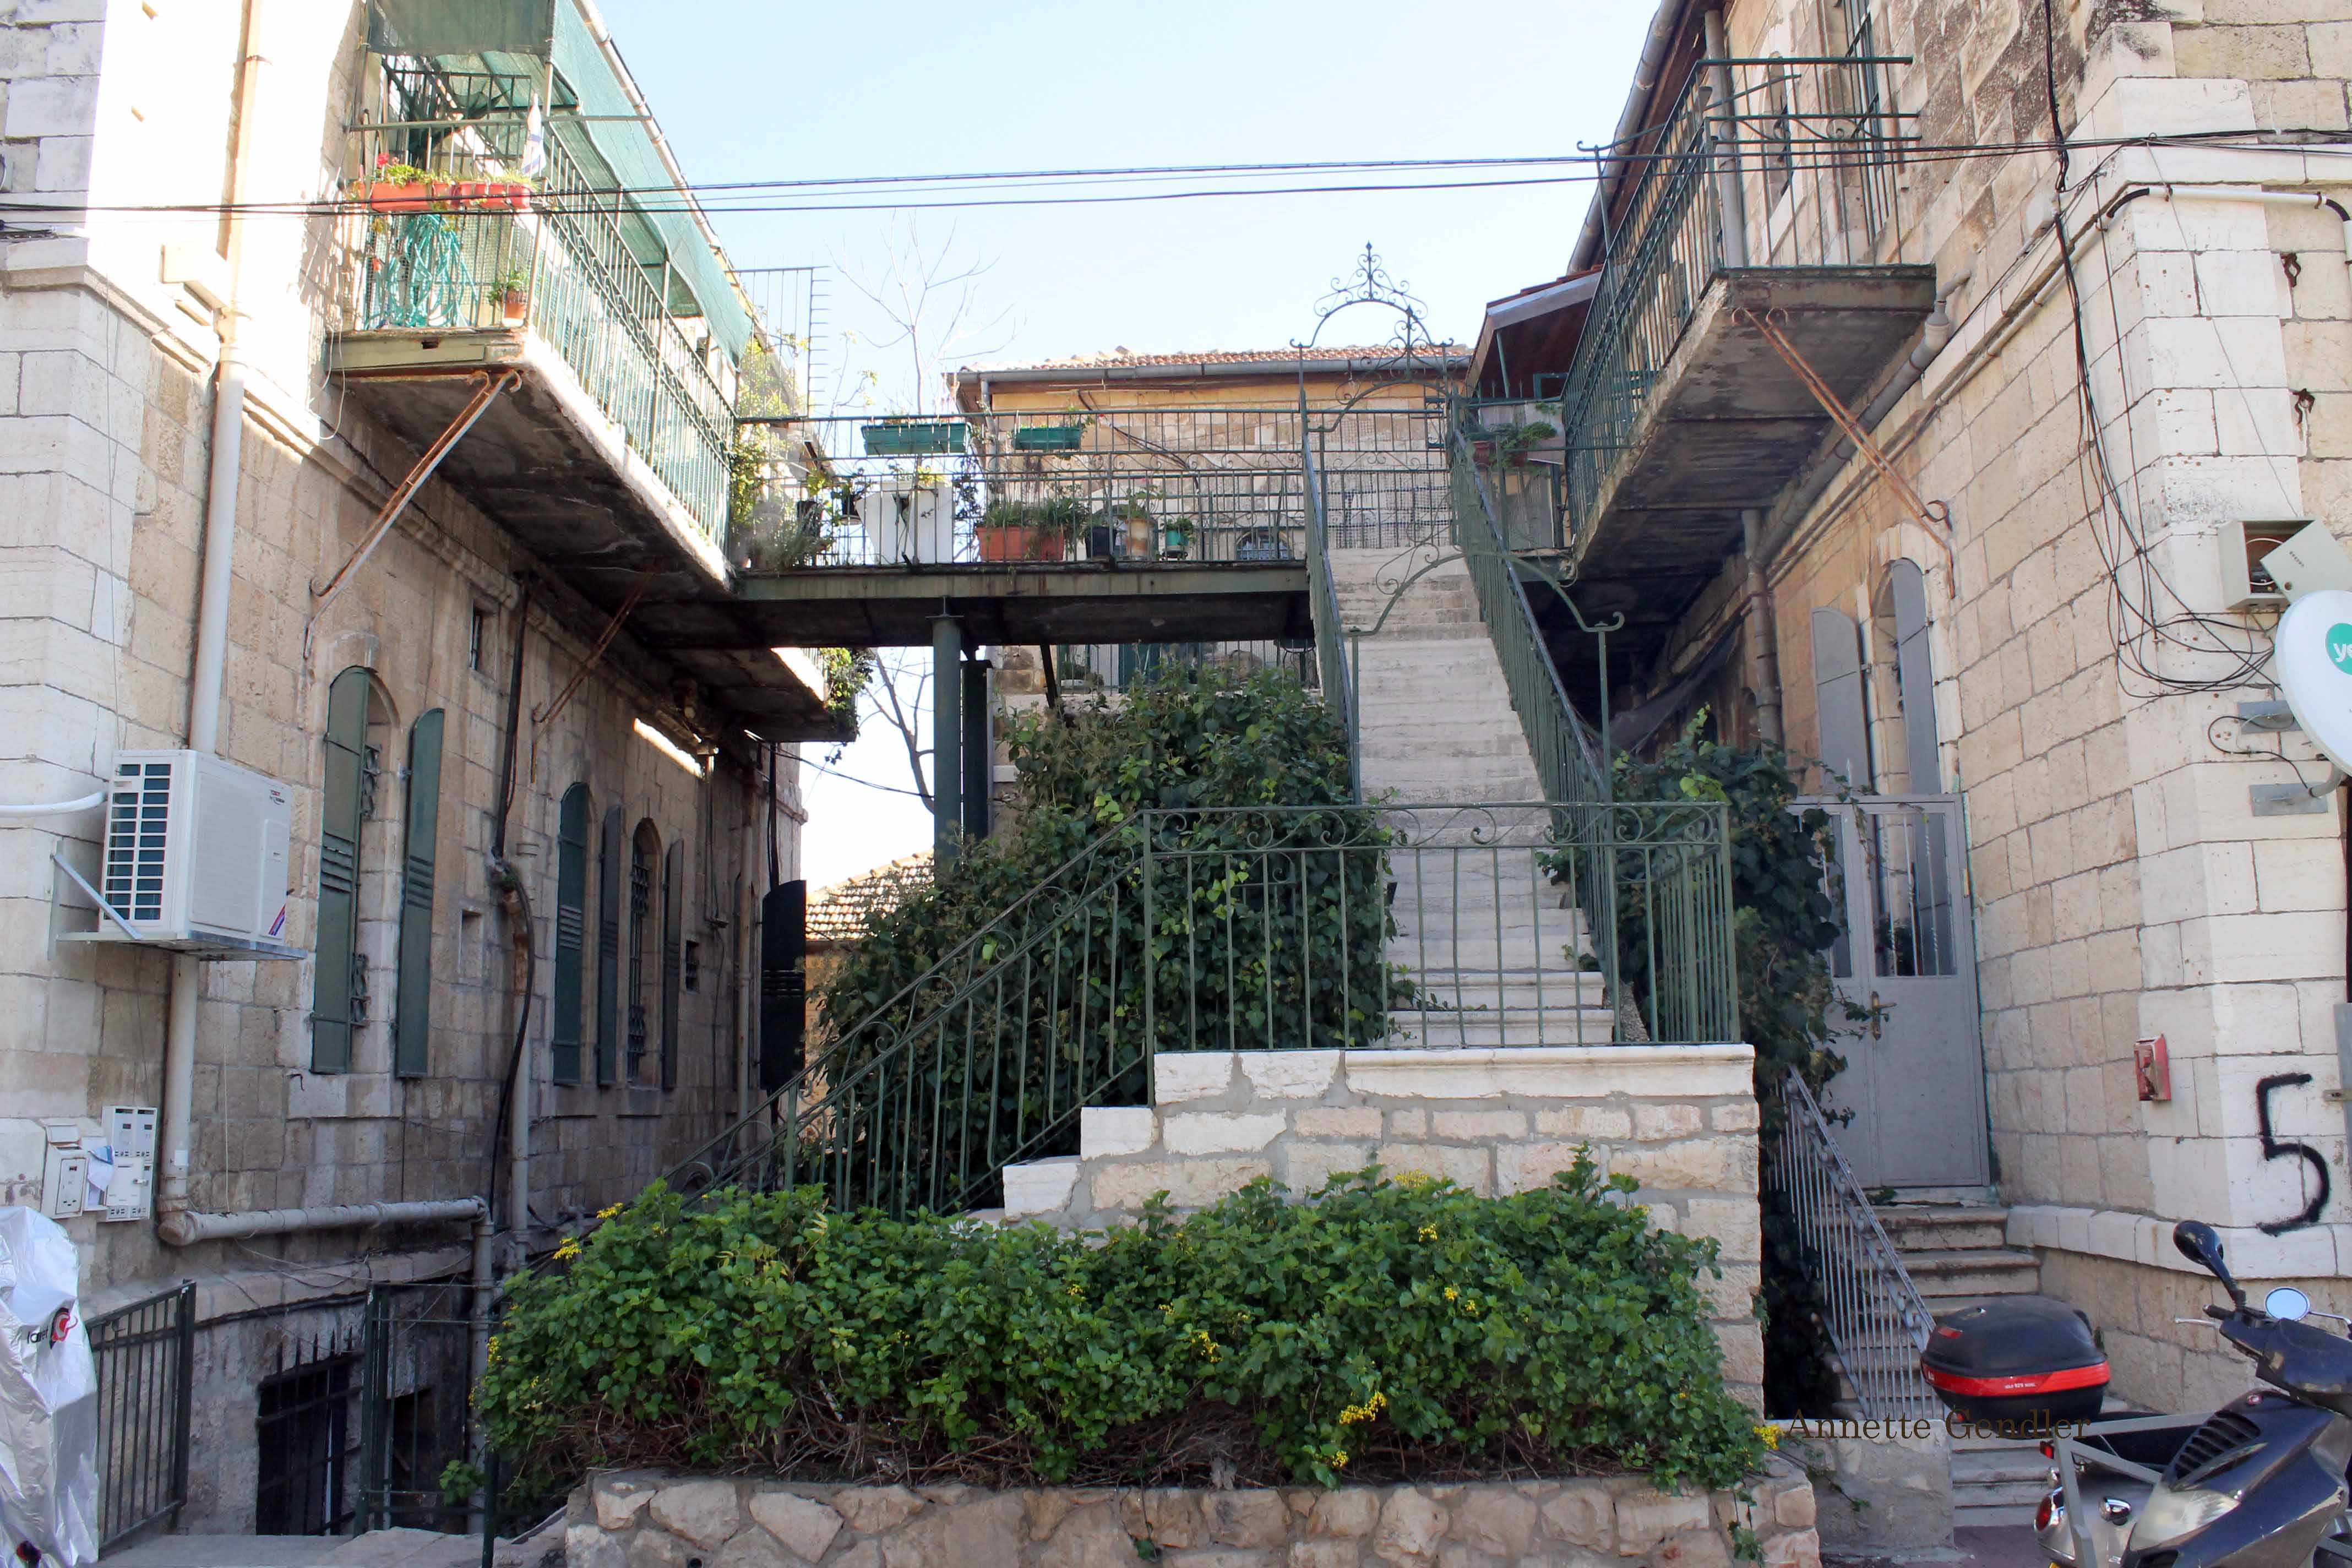 Two old Jerusalem houses in Musrara connected by outside limestone stairs with ironwork railings